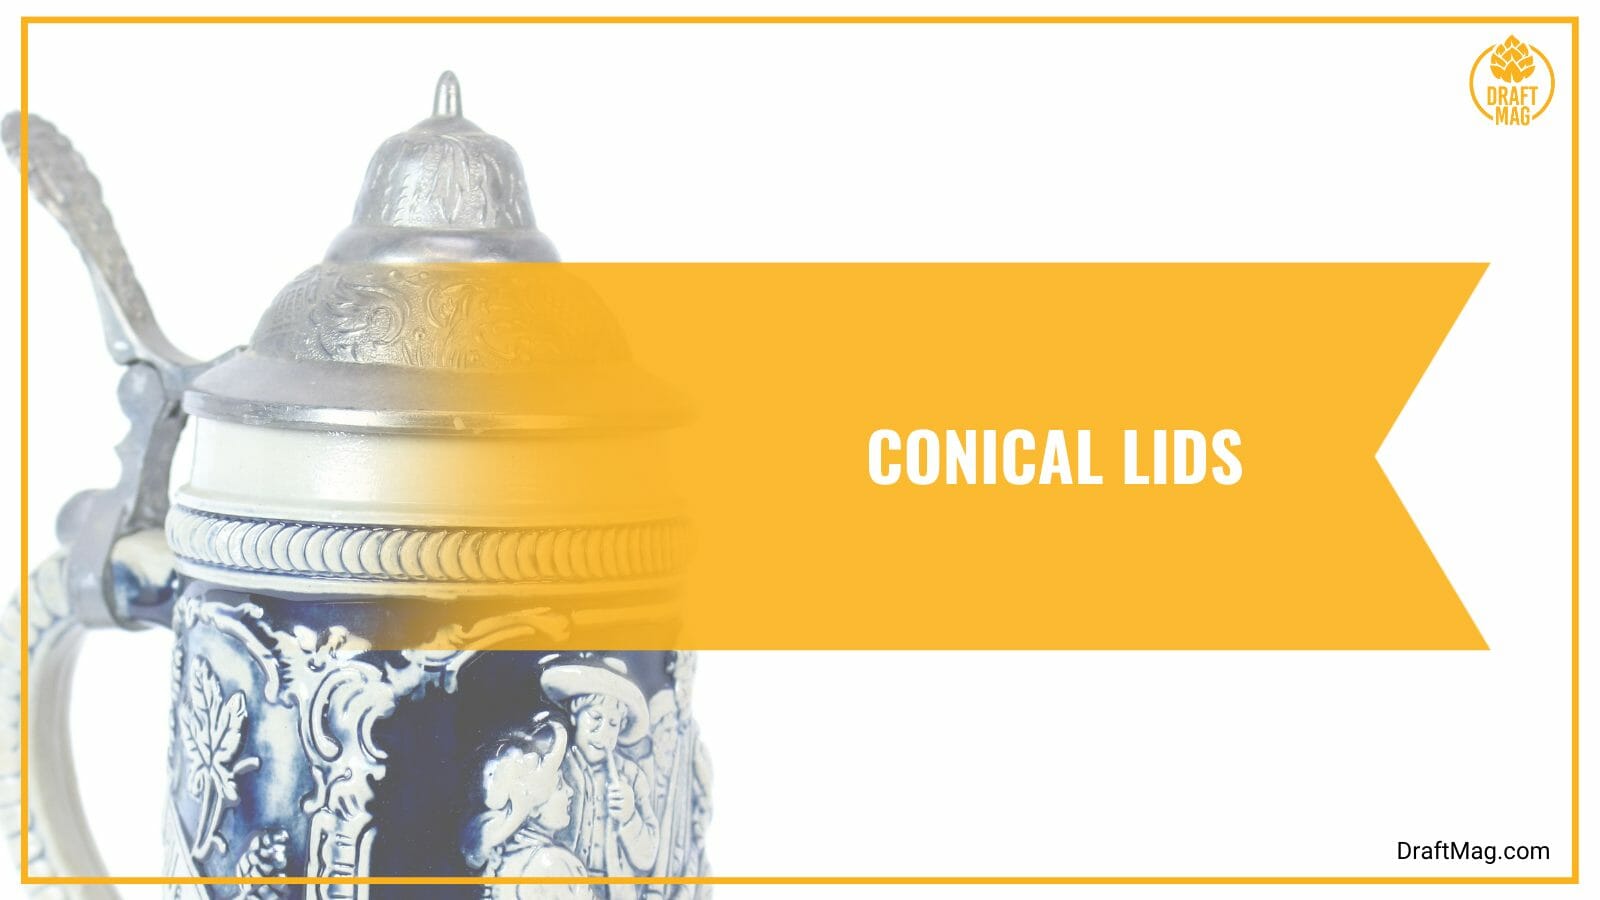 Conical lids with nickel